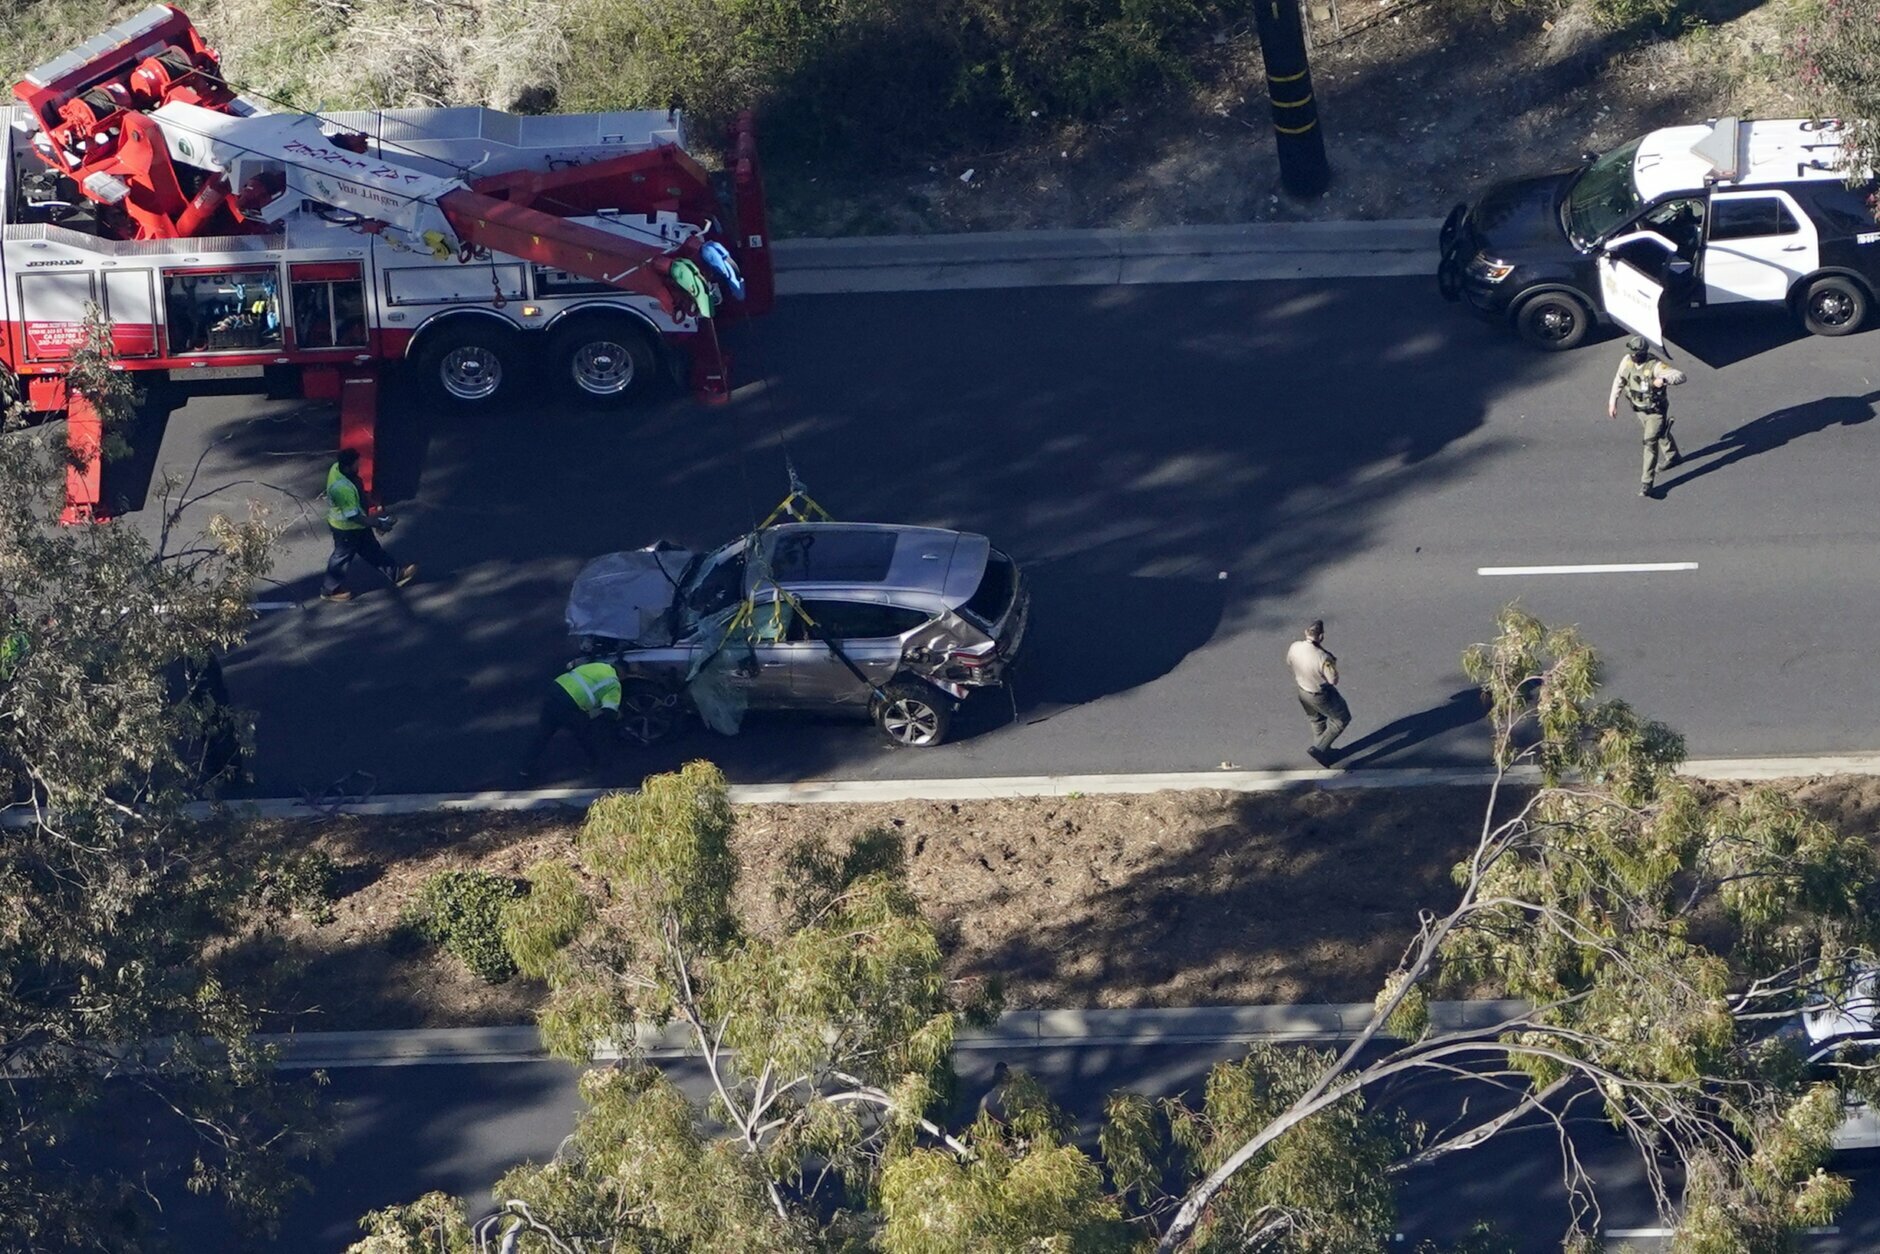 Workers move a vehicle after a rollover accident involving golfer Tiger Woods Tuesday, Feb. 23, 2021, in Rancho Palos Verdes, Calif. a suburb of Los Angeles. Woods suffered leg injuries in the one-car accident and was undergoing surgery, authorities and his manager said. (AP Photo/Mark J. Terrill)